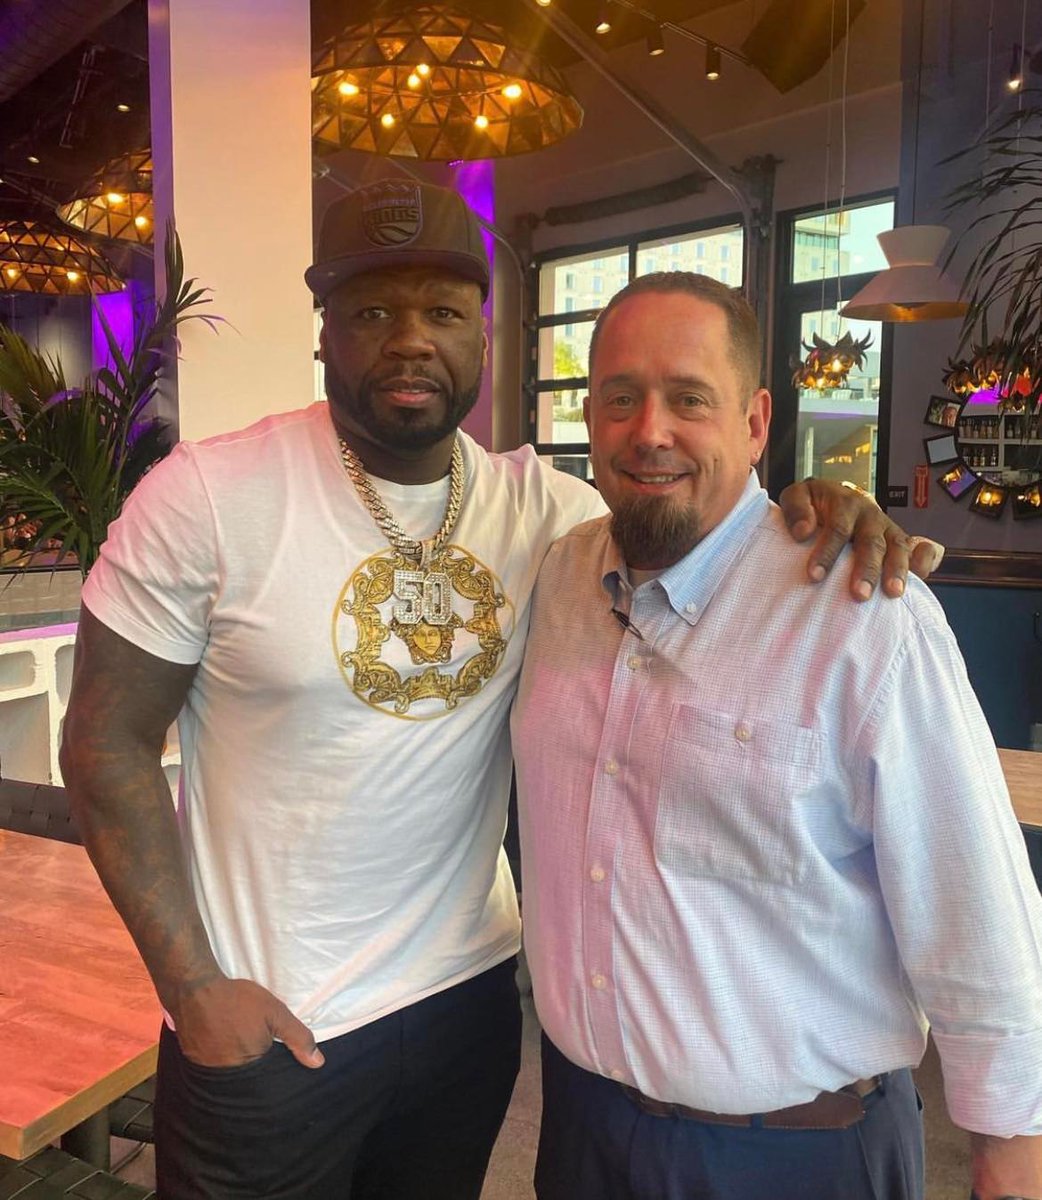 Go shorty! @50cent's award-winning cognac and sparkling wines @SireSpirits are now available at @polanco_doco. You can also enjoy these spirits at @Golden1Center. We'll toast that that @SacramentoKings! 🥂🥃 #cheers #SacramentoProud #DOCO